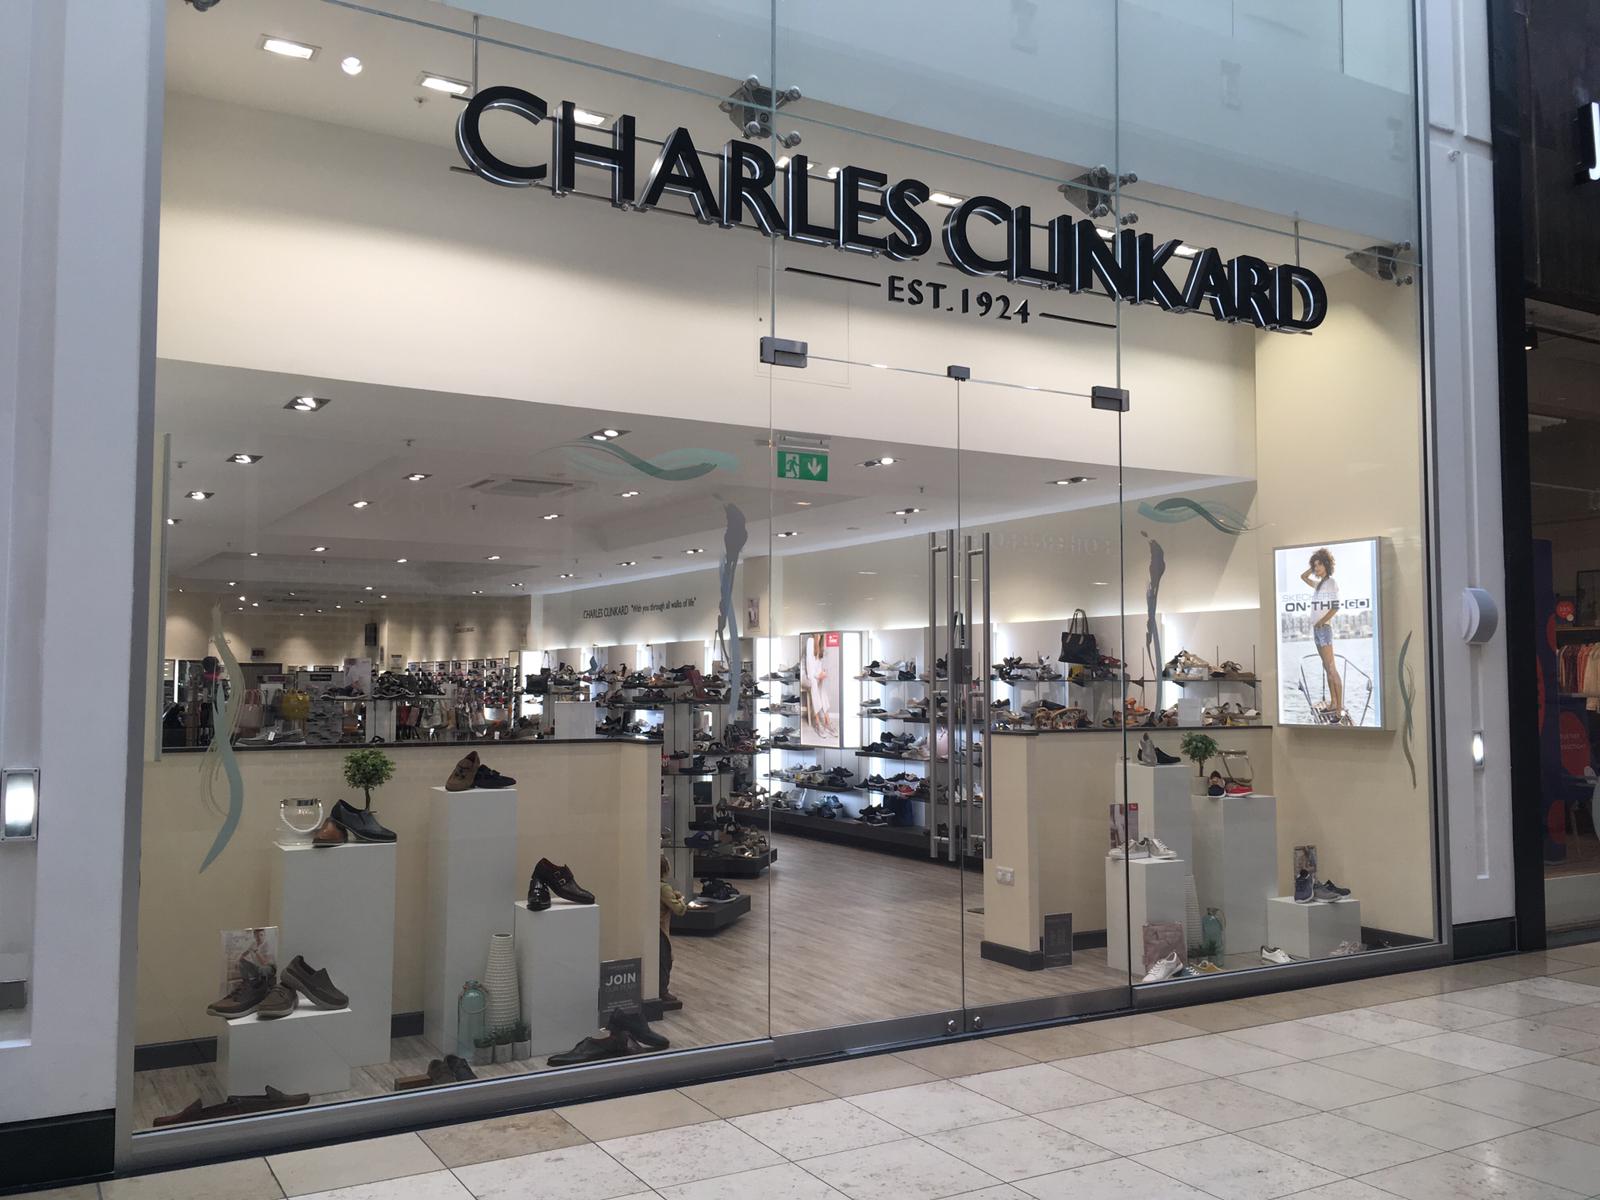 Located on the busy area of Midsummer Boulevard, the Charles Clinkard Milton Keynes store stocks a w Charles Clinkard Milton Keynes Milton Keynes 01908 776096